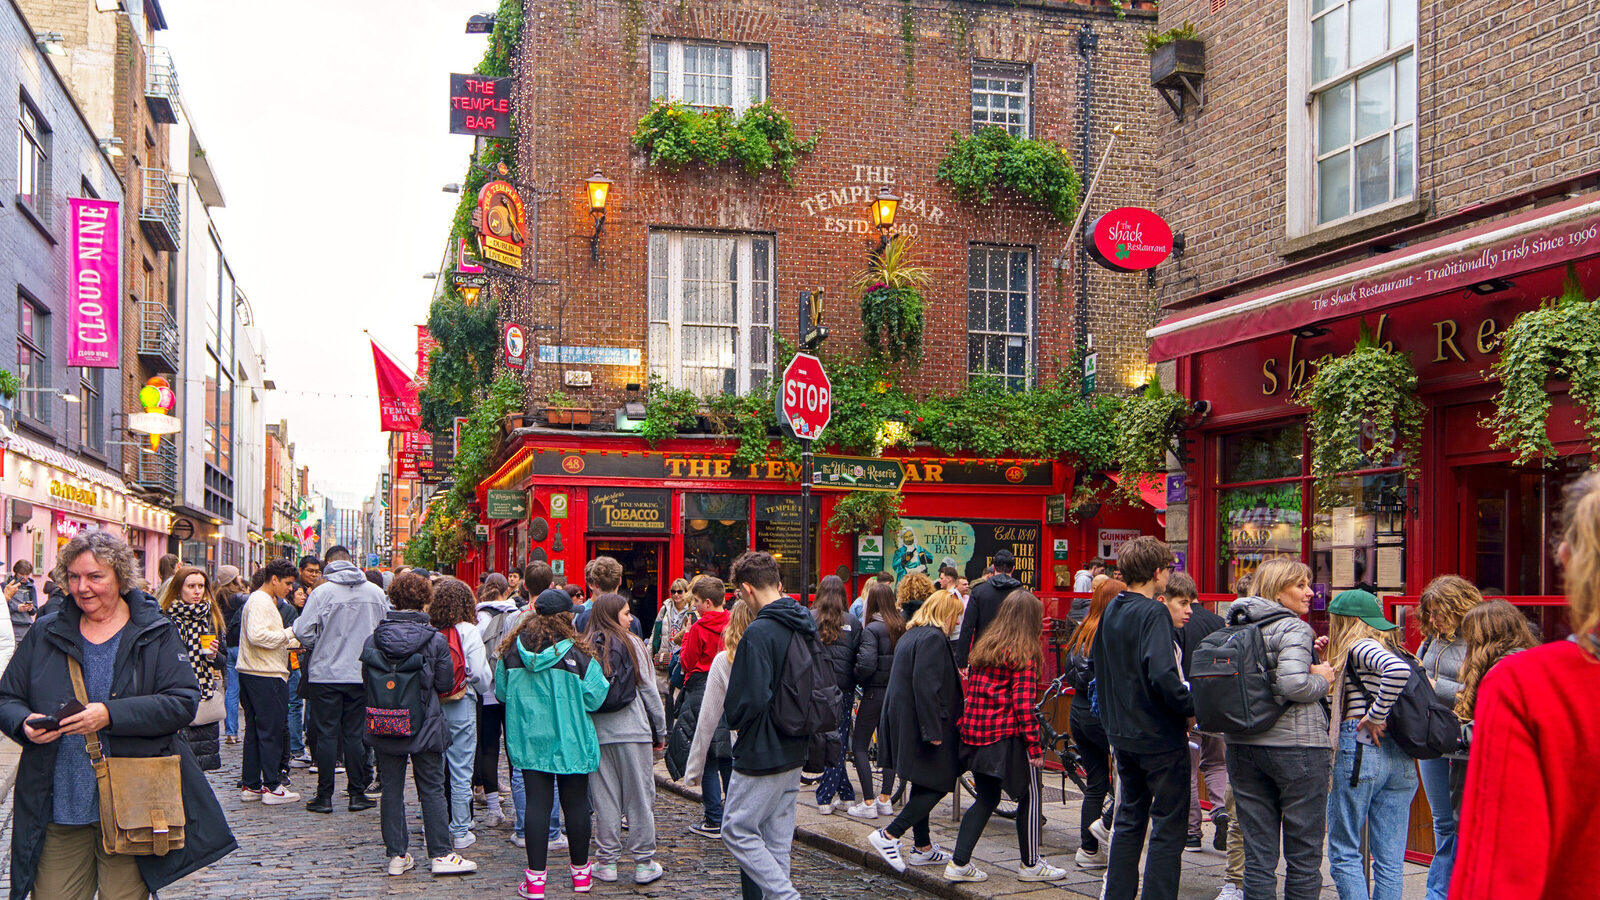 THE TEMPLE BAR PUB [IS IN TEMPLE BAR AND IT IS NOT THE OLDEST PUB IN THE IMMEDIATE AREA]-228207-1